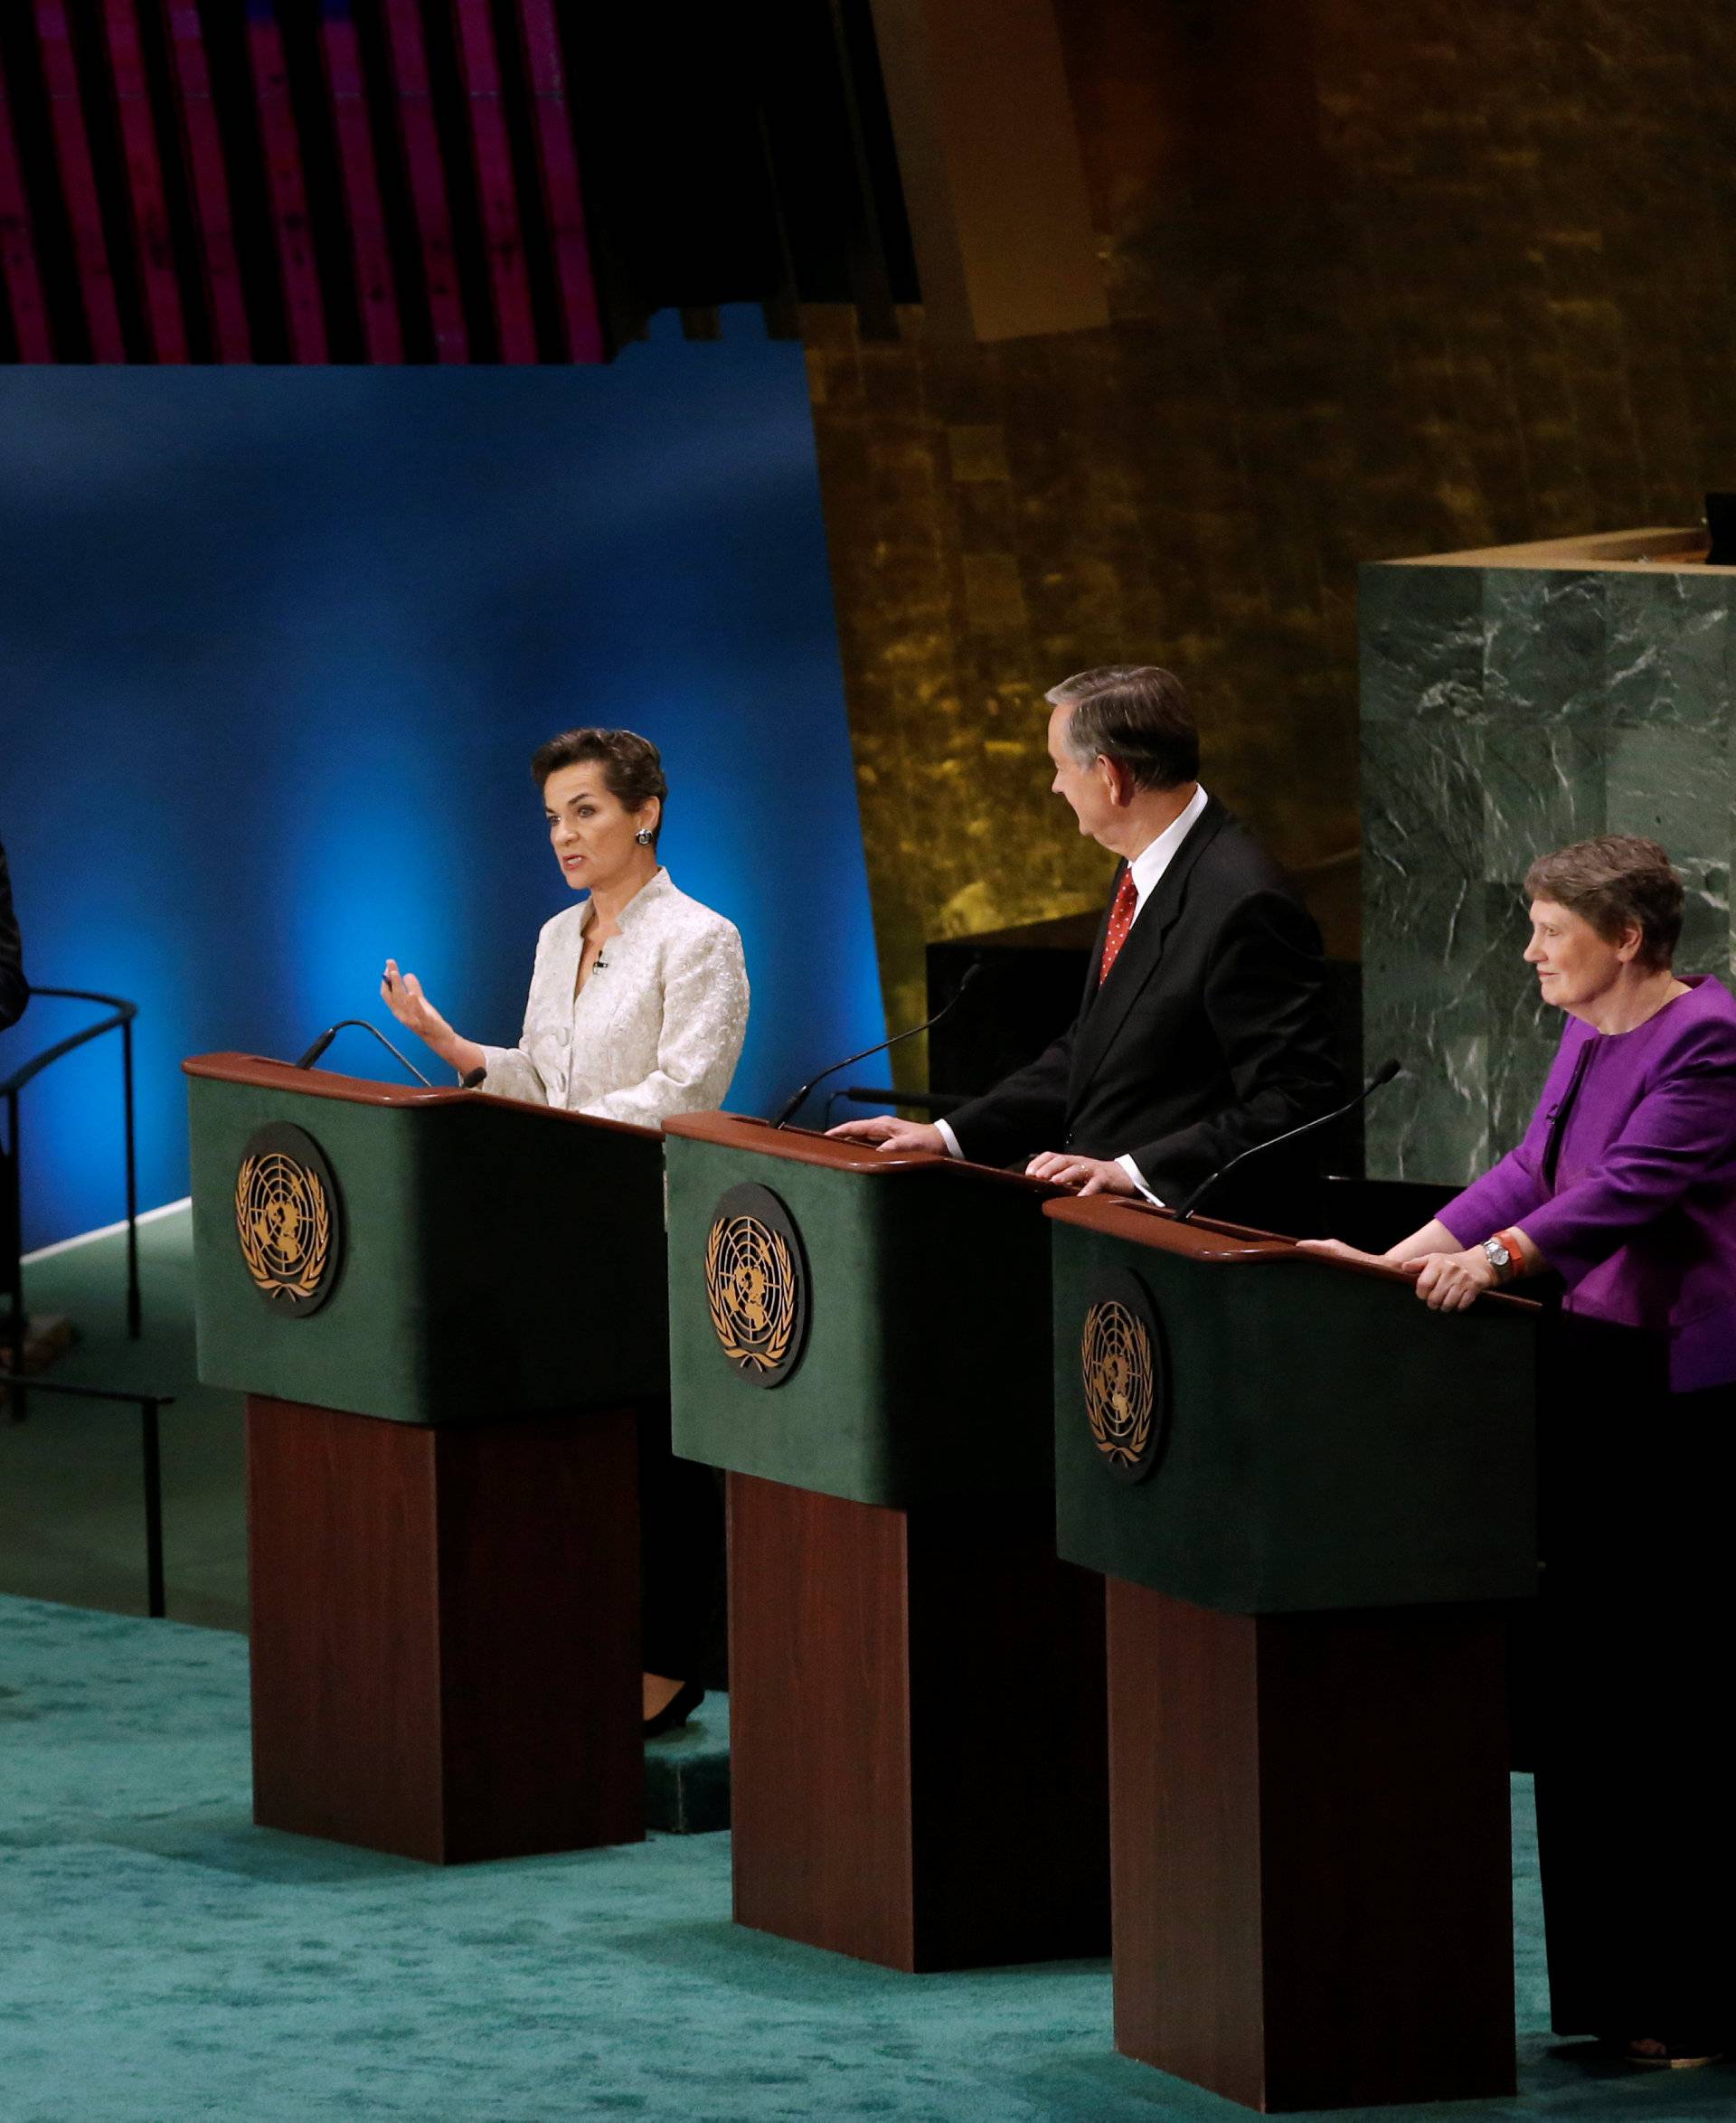 Former United Nations climate chief Christiana Figueres speaks during a debate in the United Nations General Assembly between candidates vying to be the next U.N. Secretary General at U.N. headquarters in New York